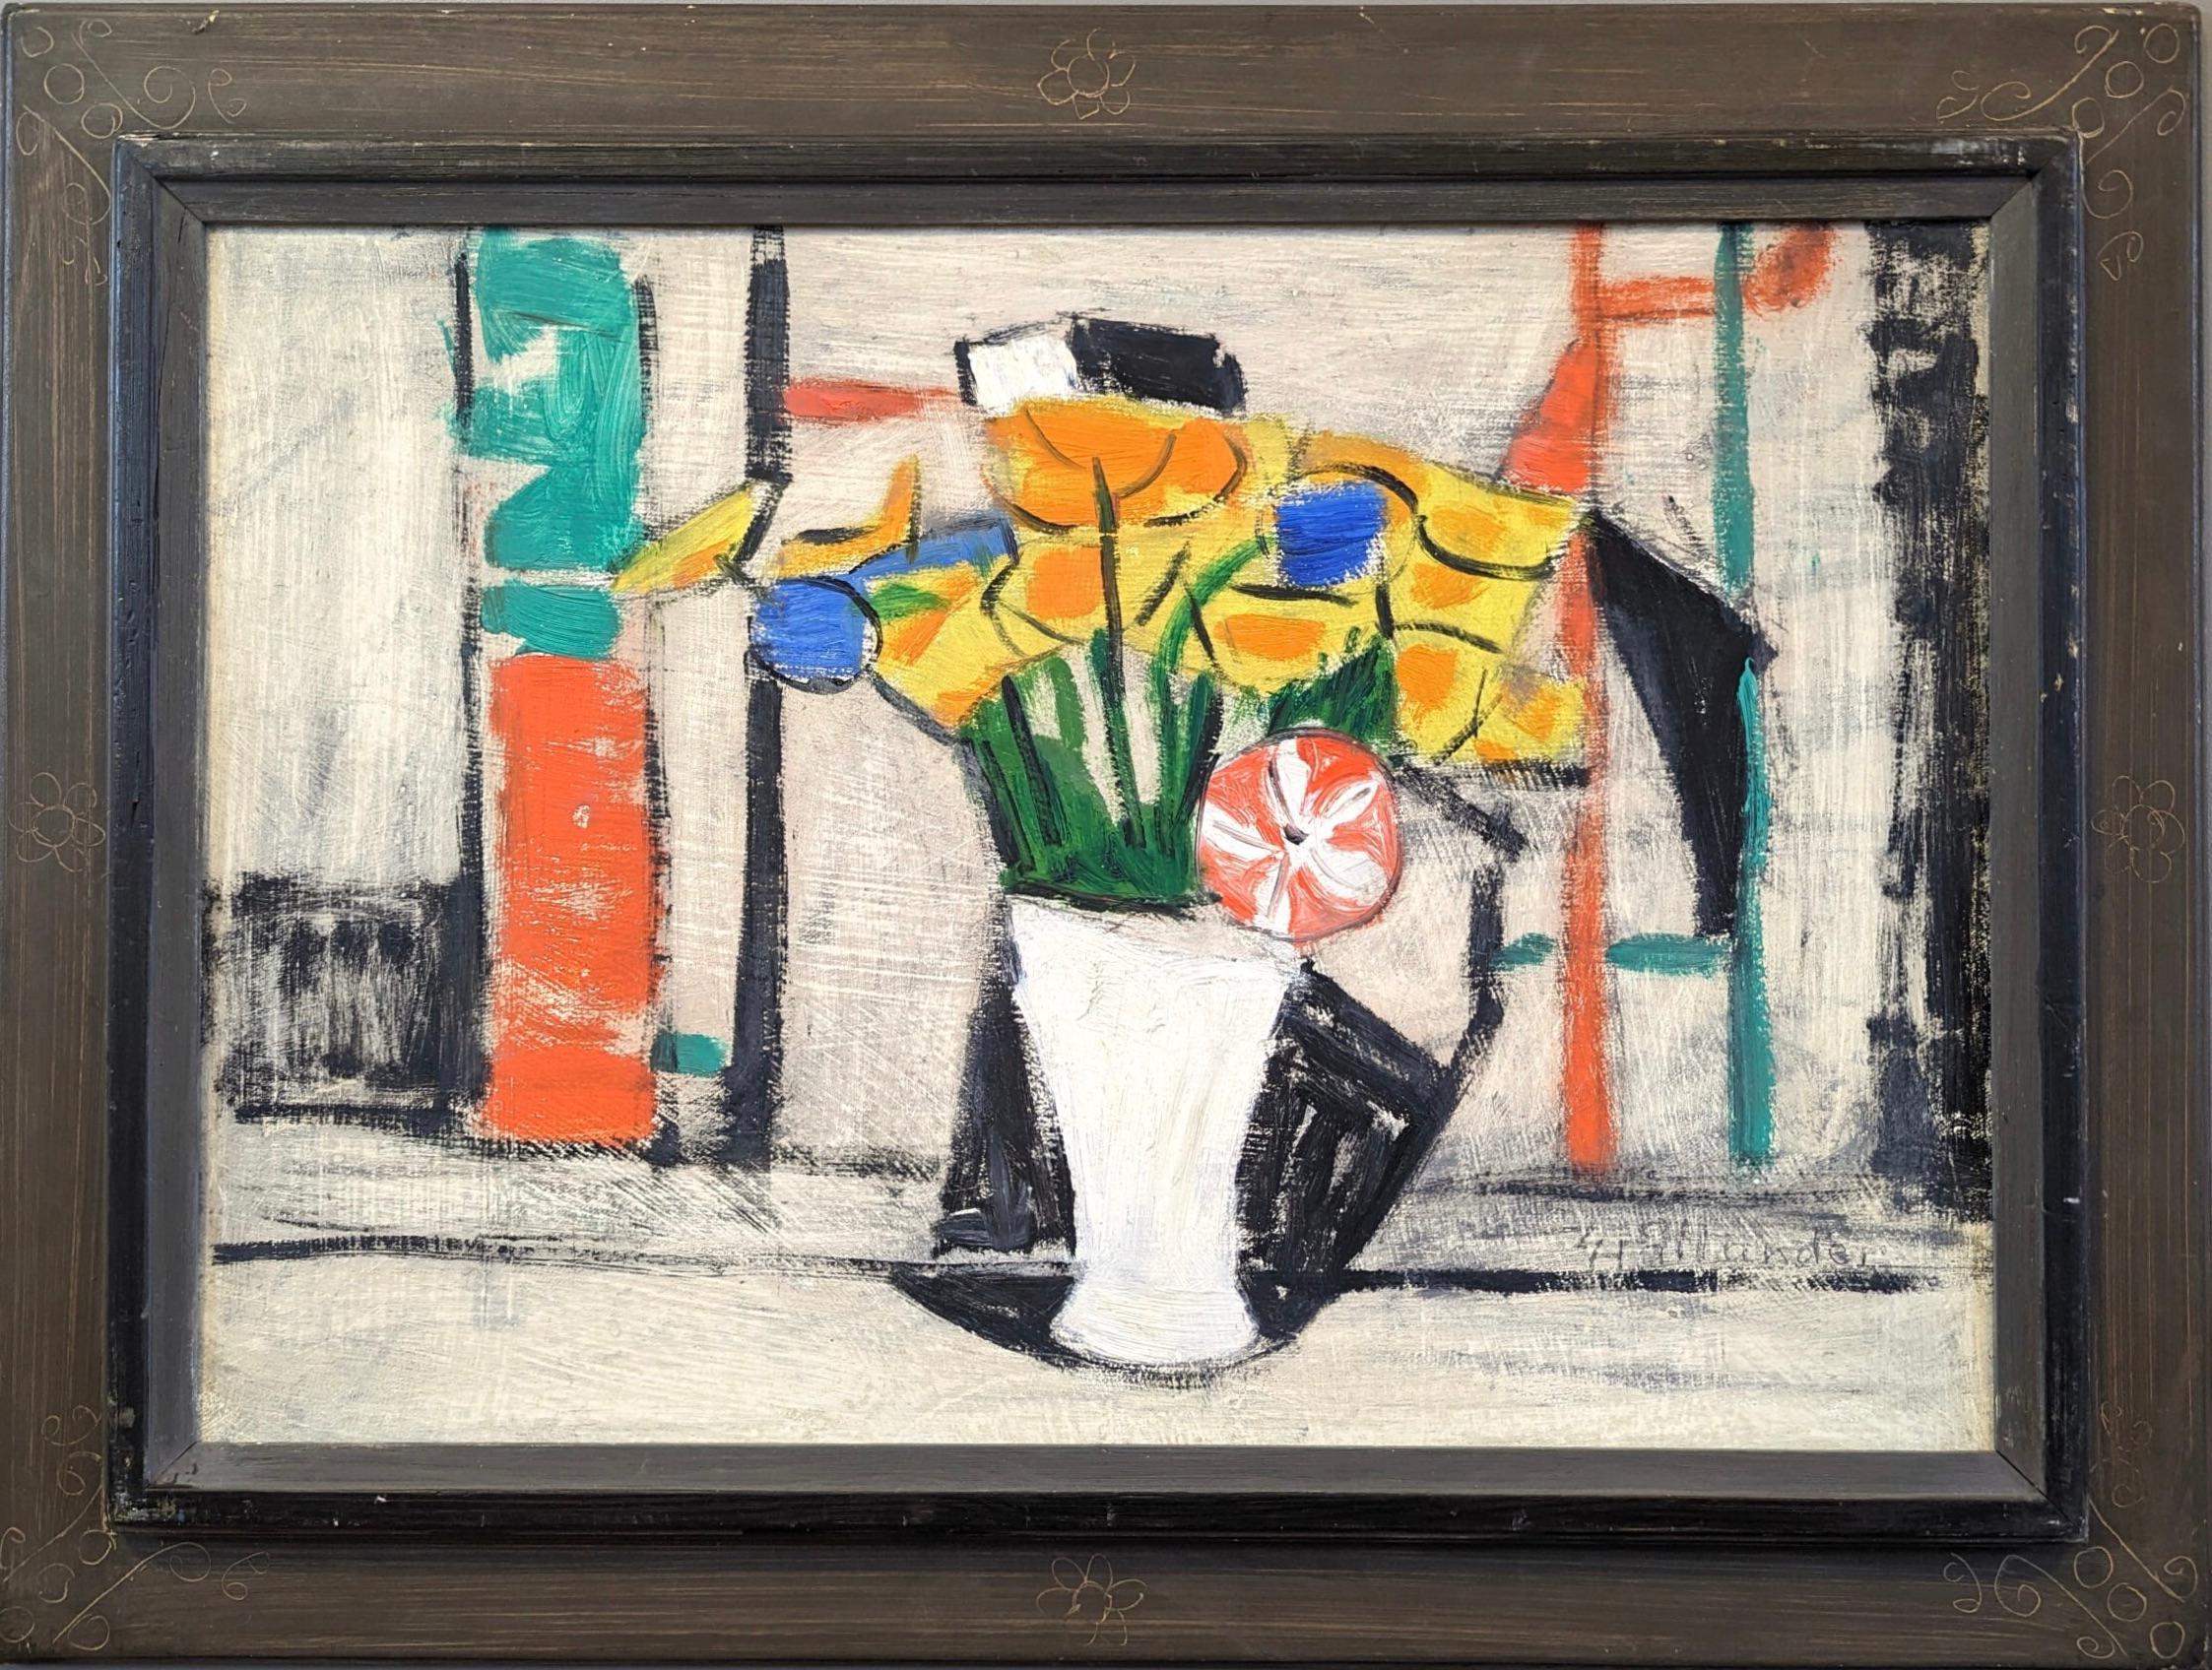 Still-Life Painting Unknown - 1964 Vintage Mid-Century Modern Swedish Still Life Oil Painting - The Bouquet